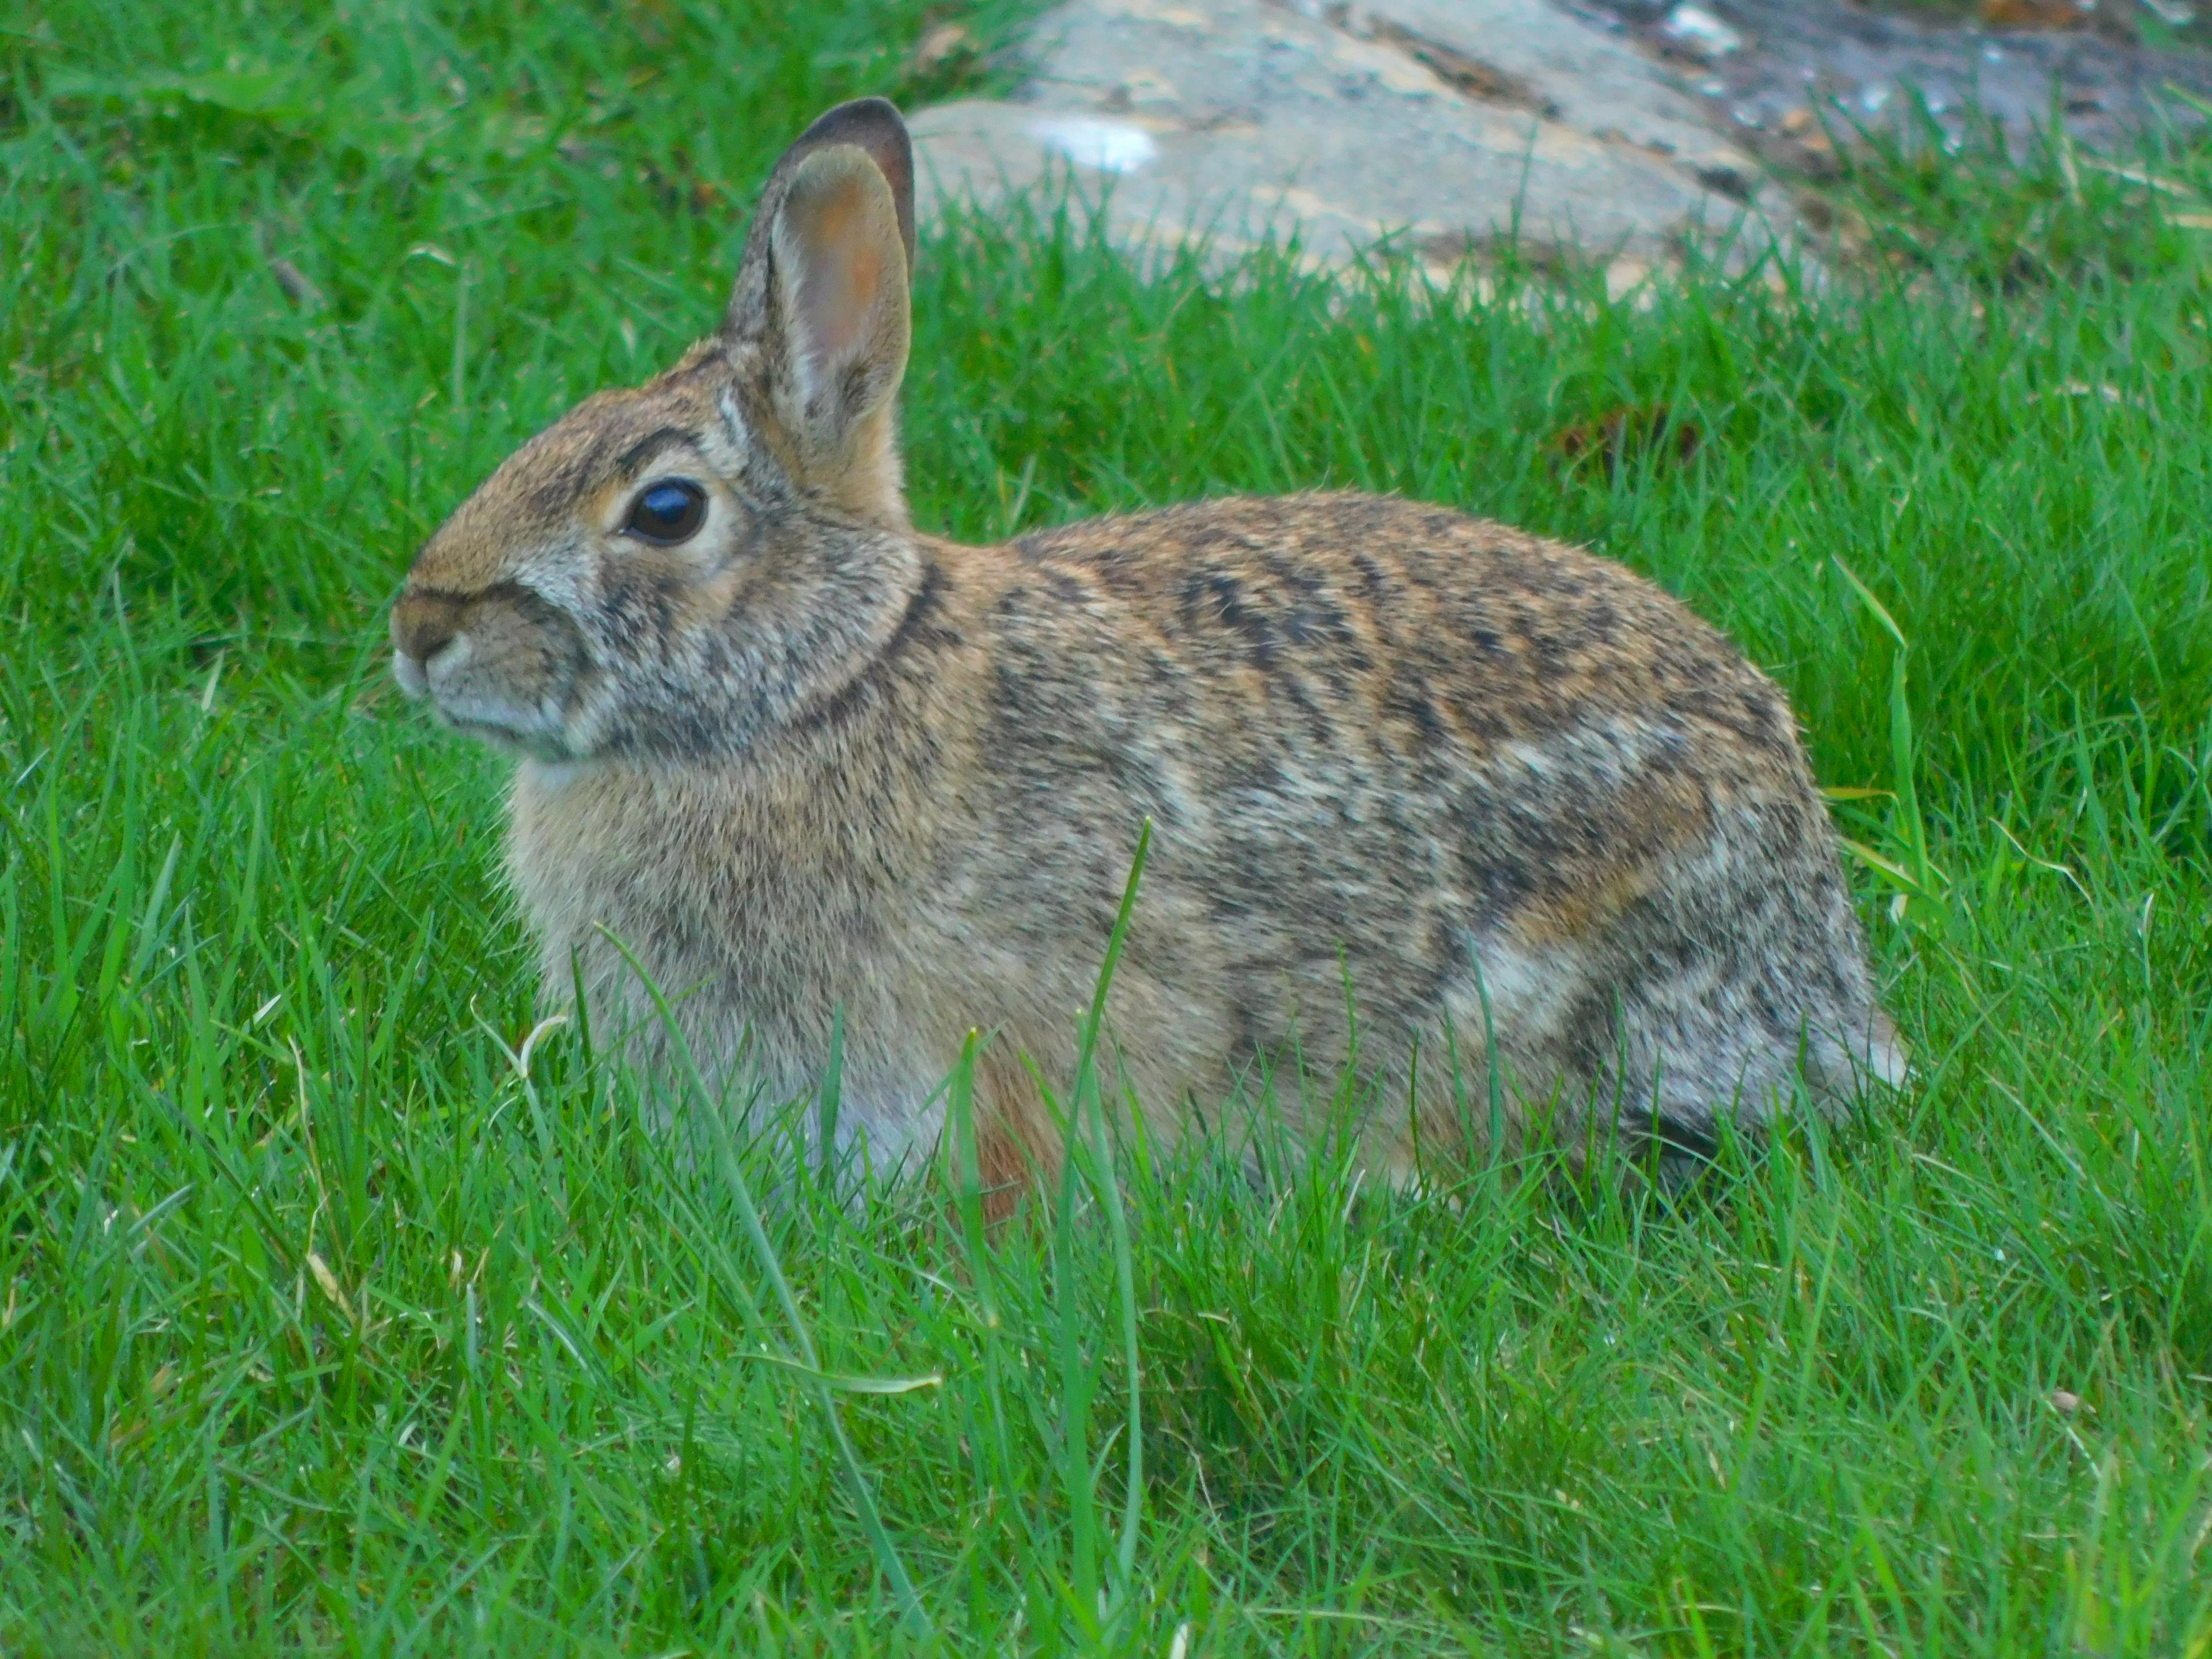 Bunny rests on bright green grass